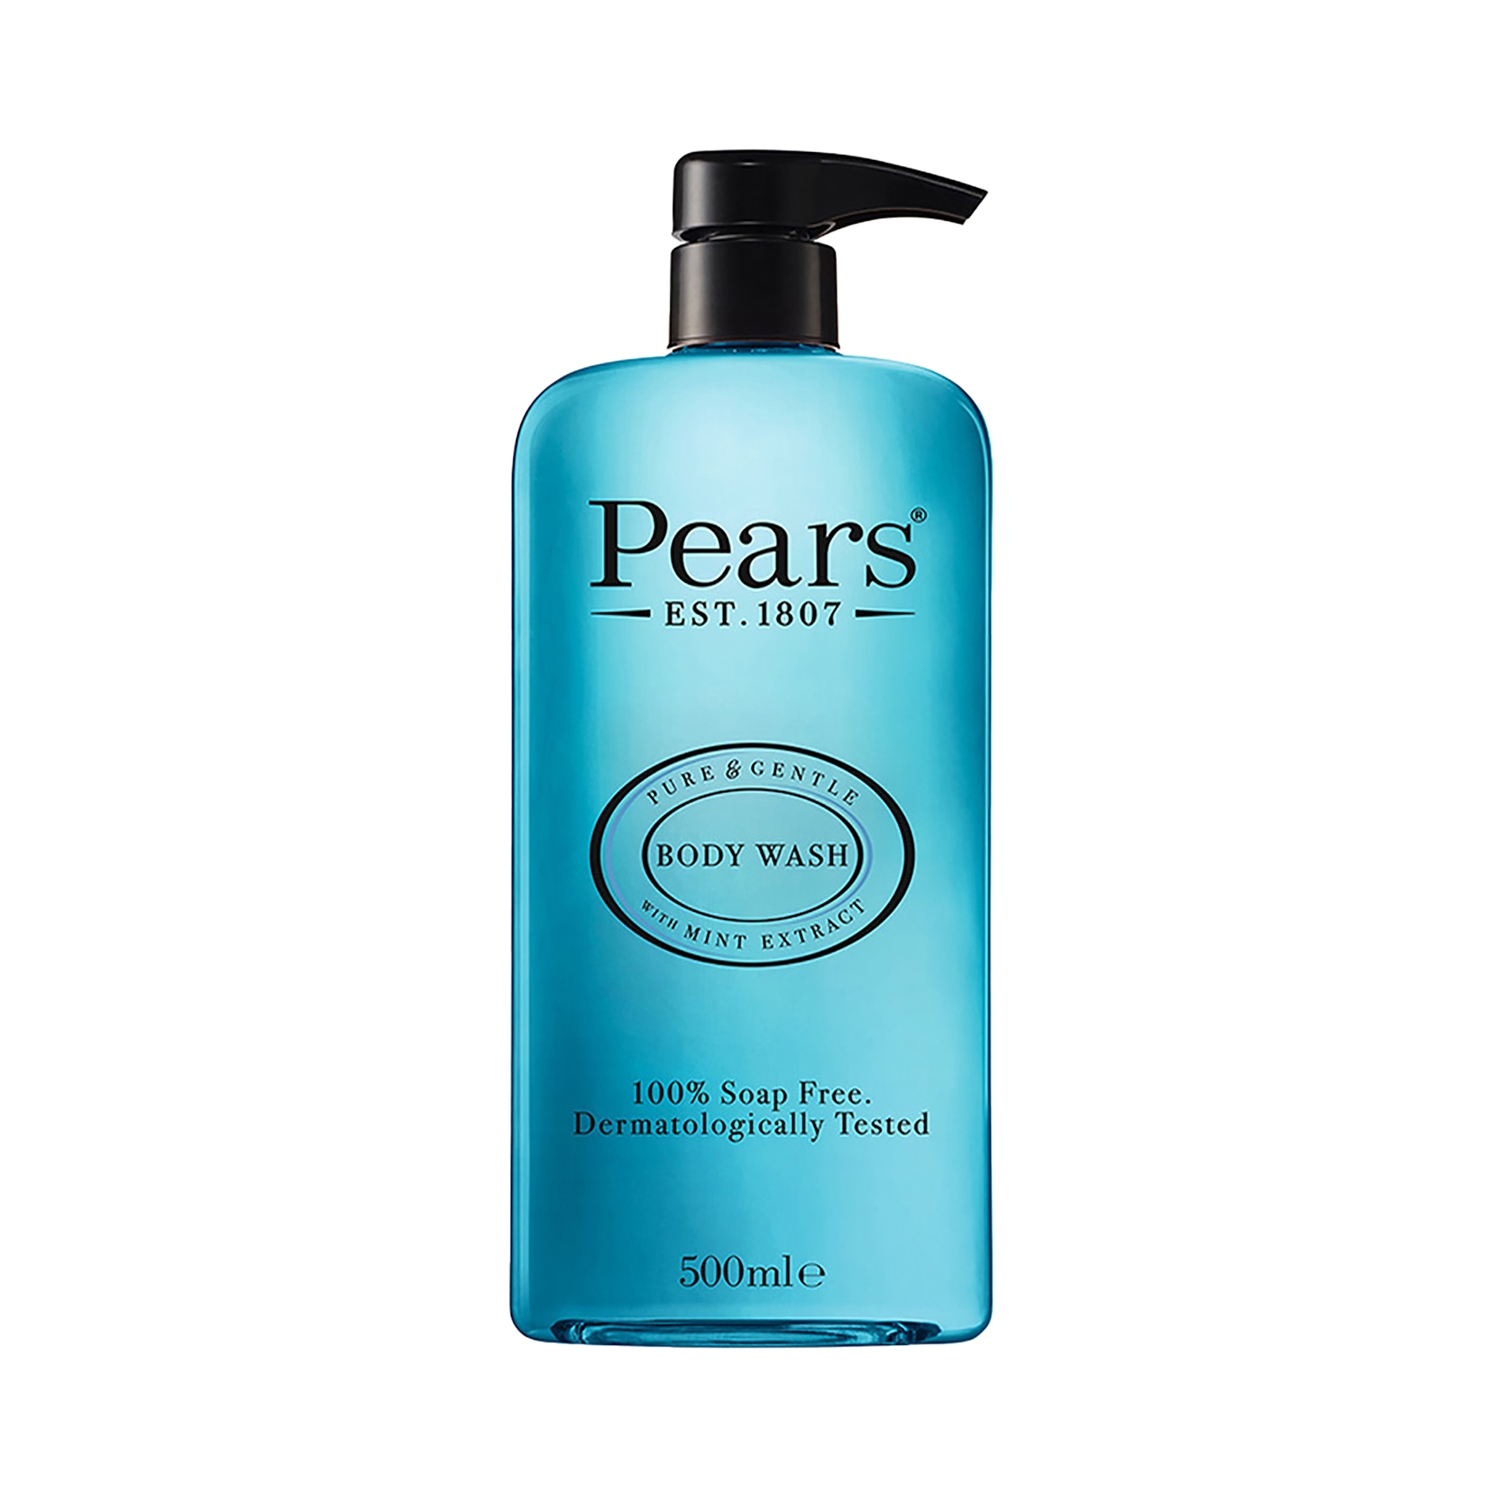 Pears | Pears Pure & Gentle Mint Extracts Body Wash (500ml)